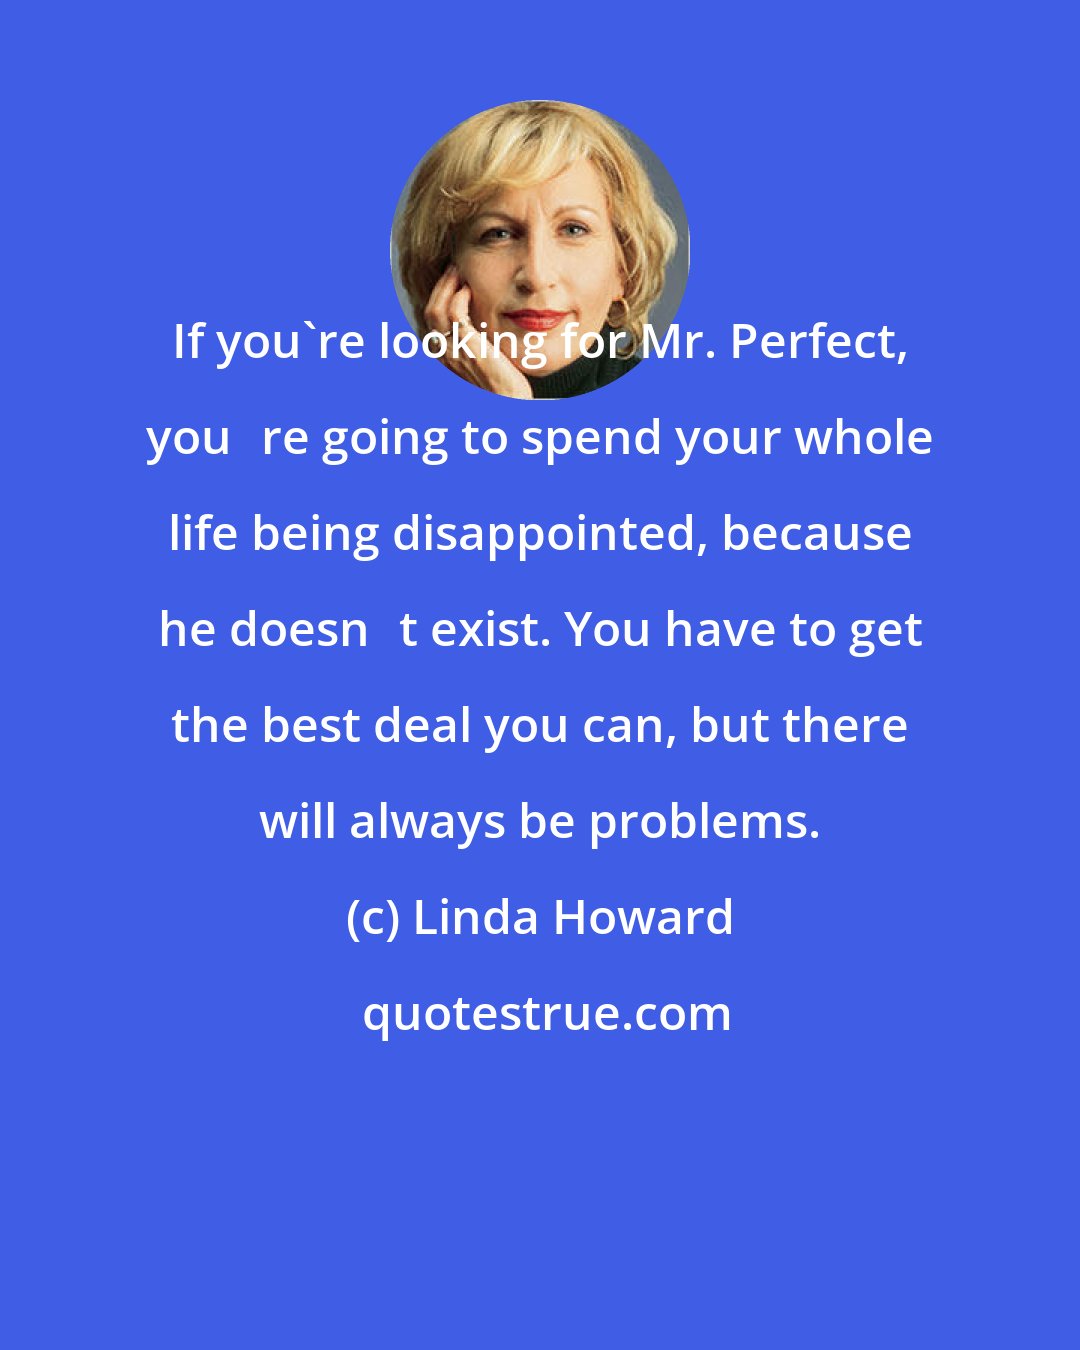 Linda Howard: If you're looking for Mr. Perfect, you‟re going to spend your whole life being disappointed, because he doesn‟t exist. You have to get the best deal you can, but there will always be problems.